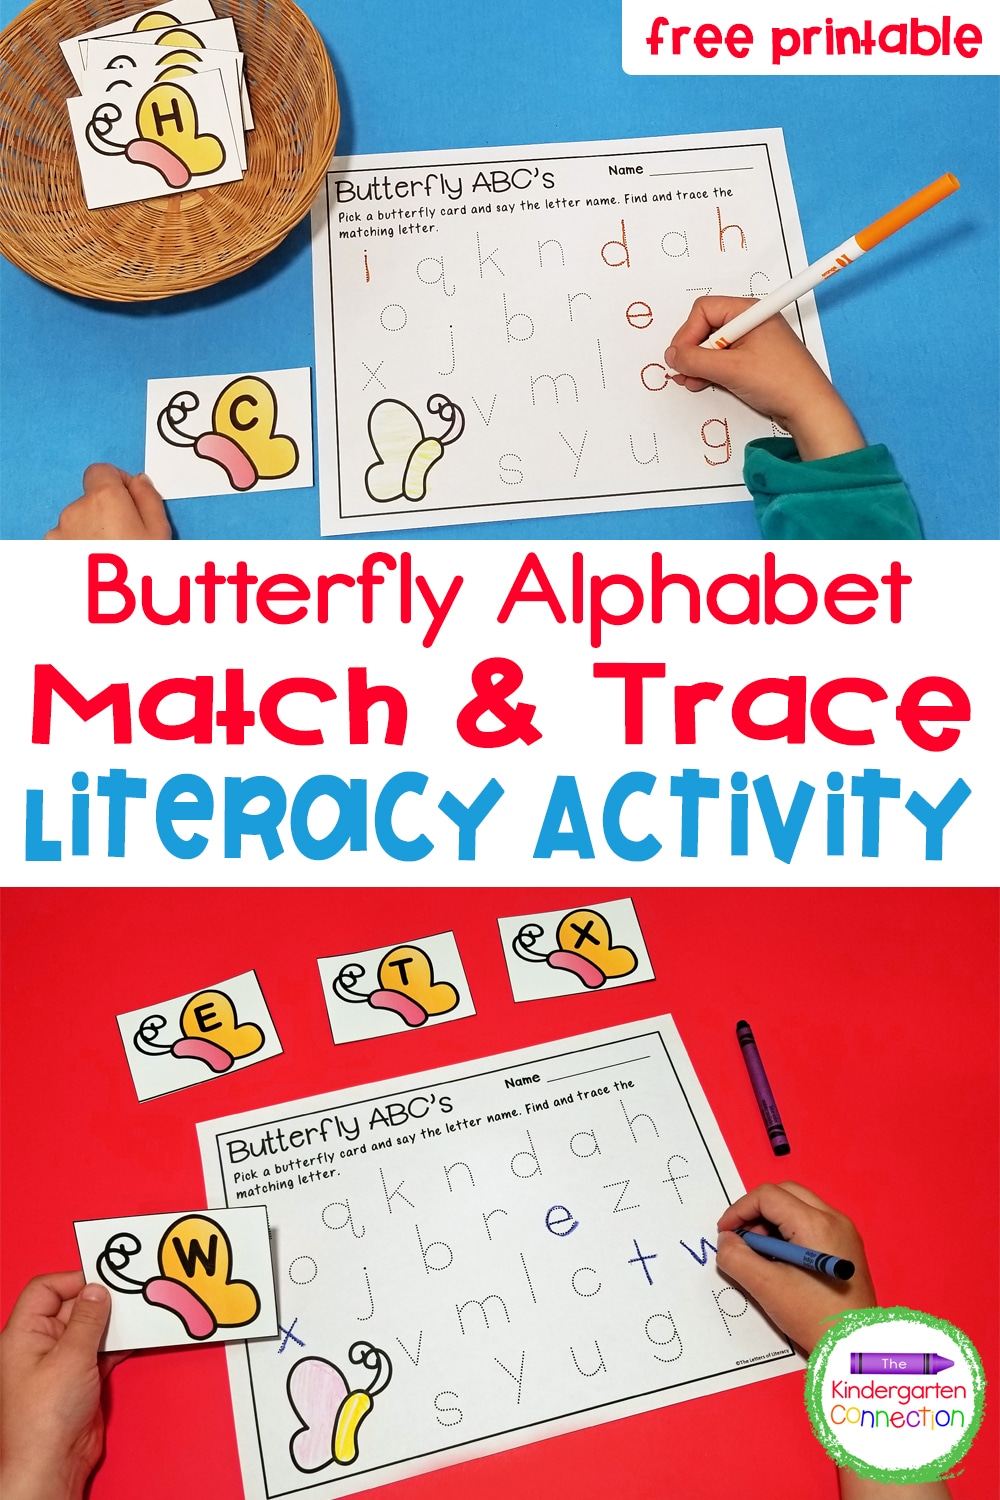 This free Butterfly Alphabet Match and Trace Activity is sure to brighten those last days of winter while inspiring some learning fun!